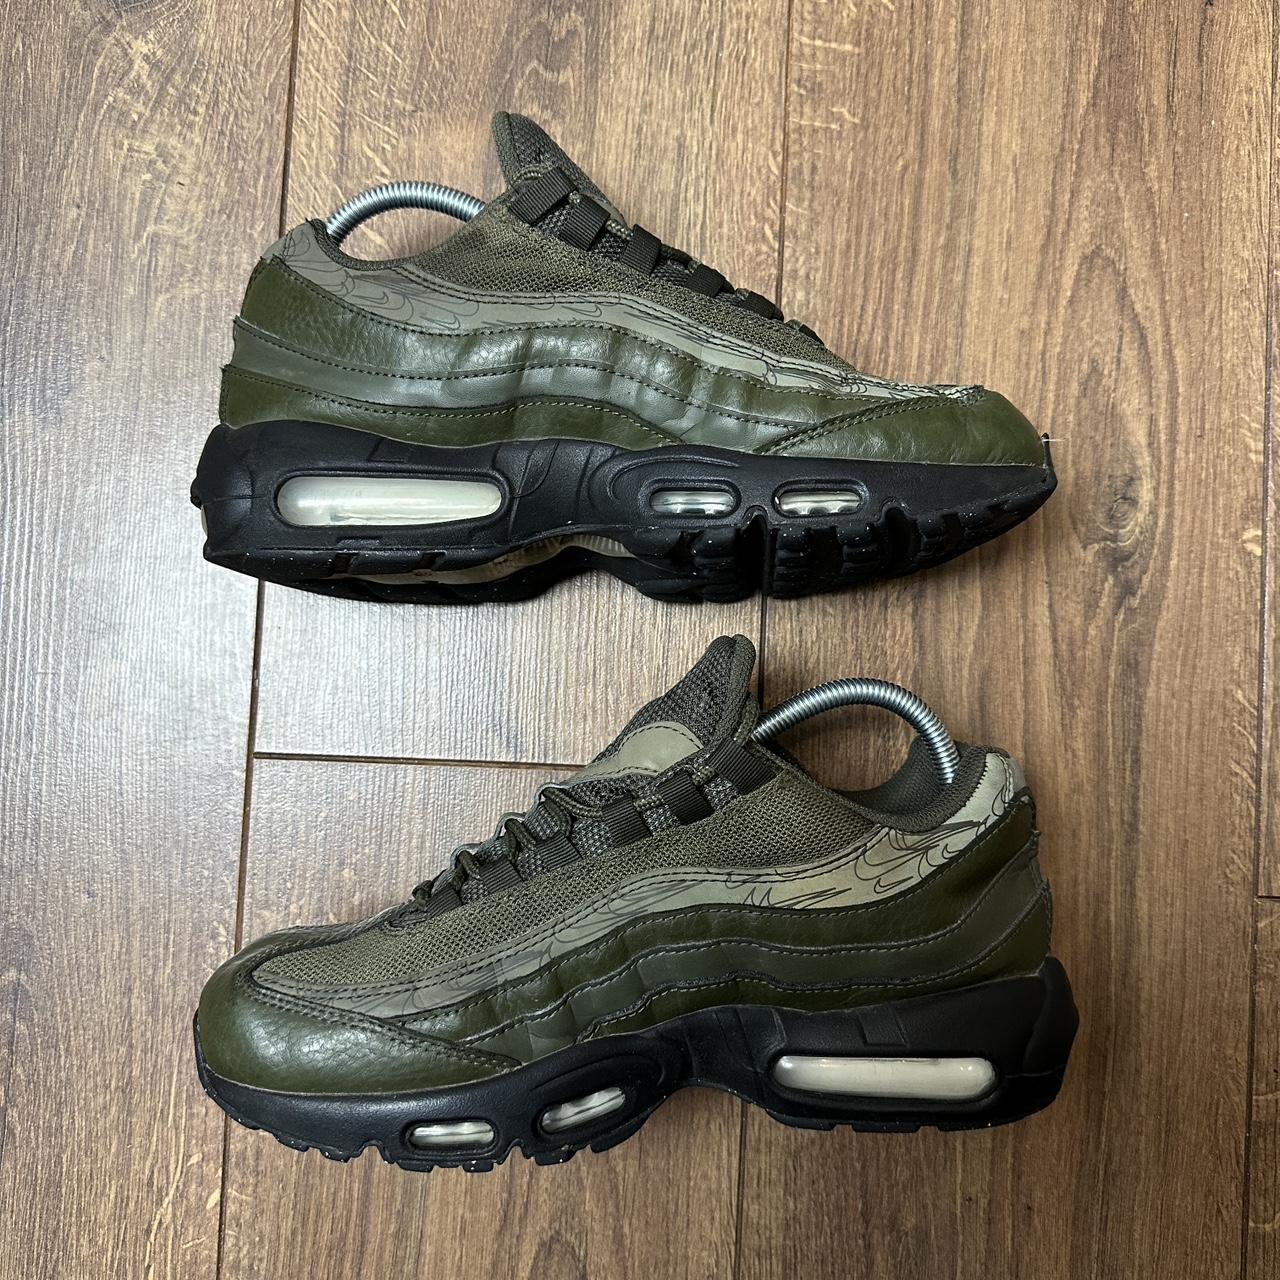 Nike Air Max 95 Reflective Green Trainers, UK Size 7... - Depop